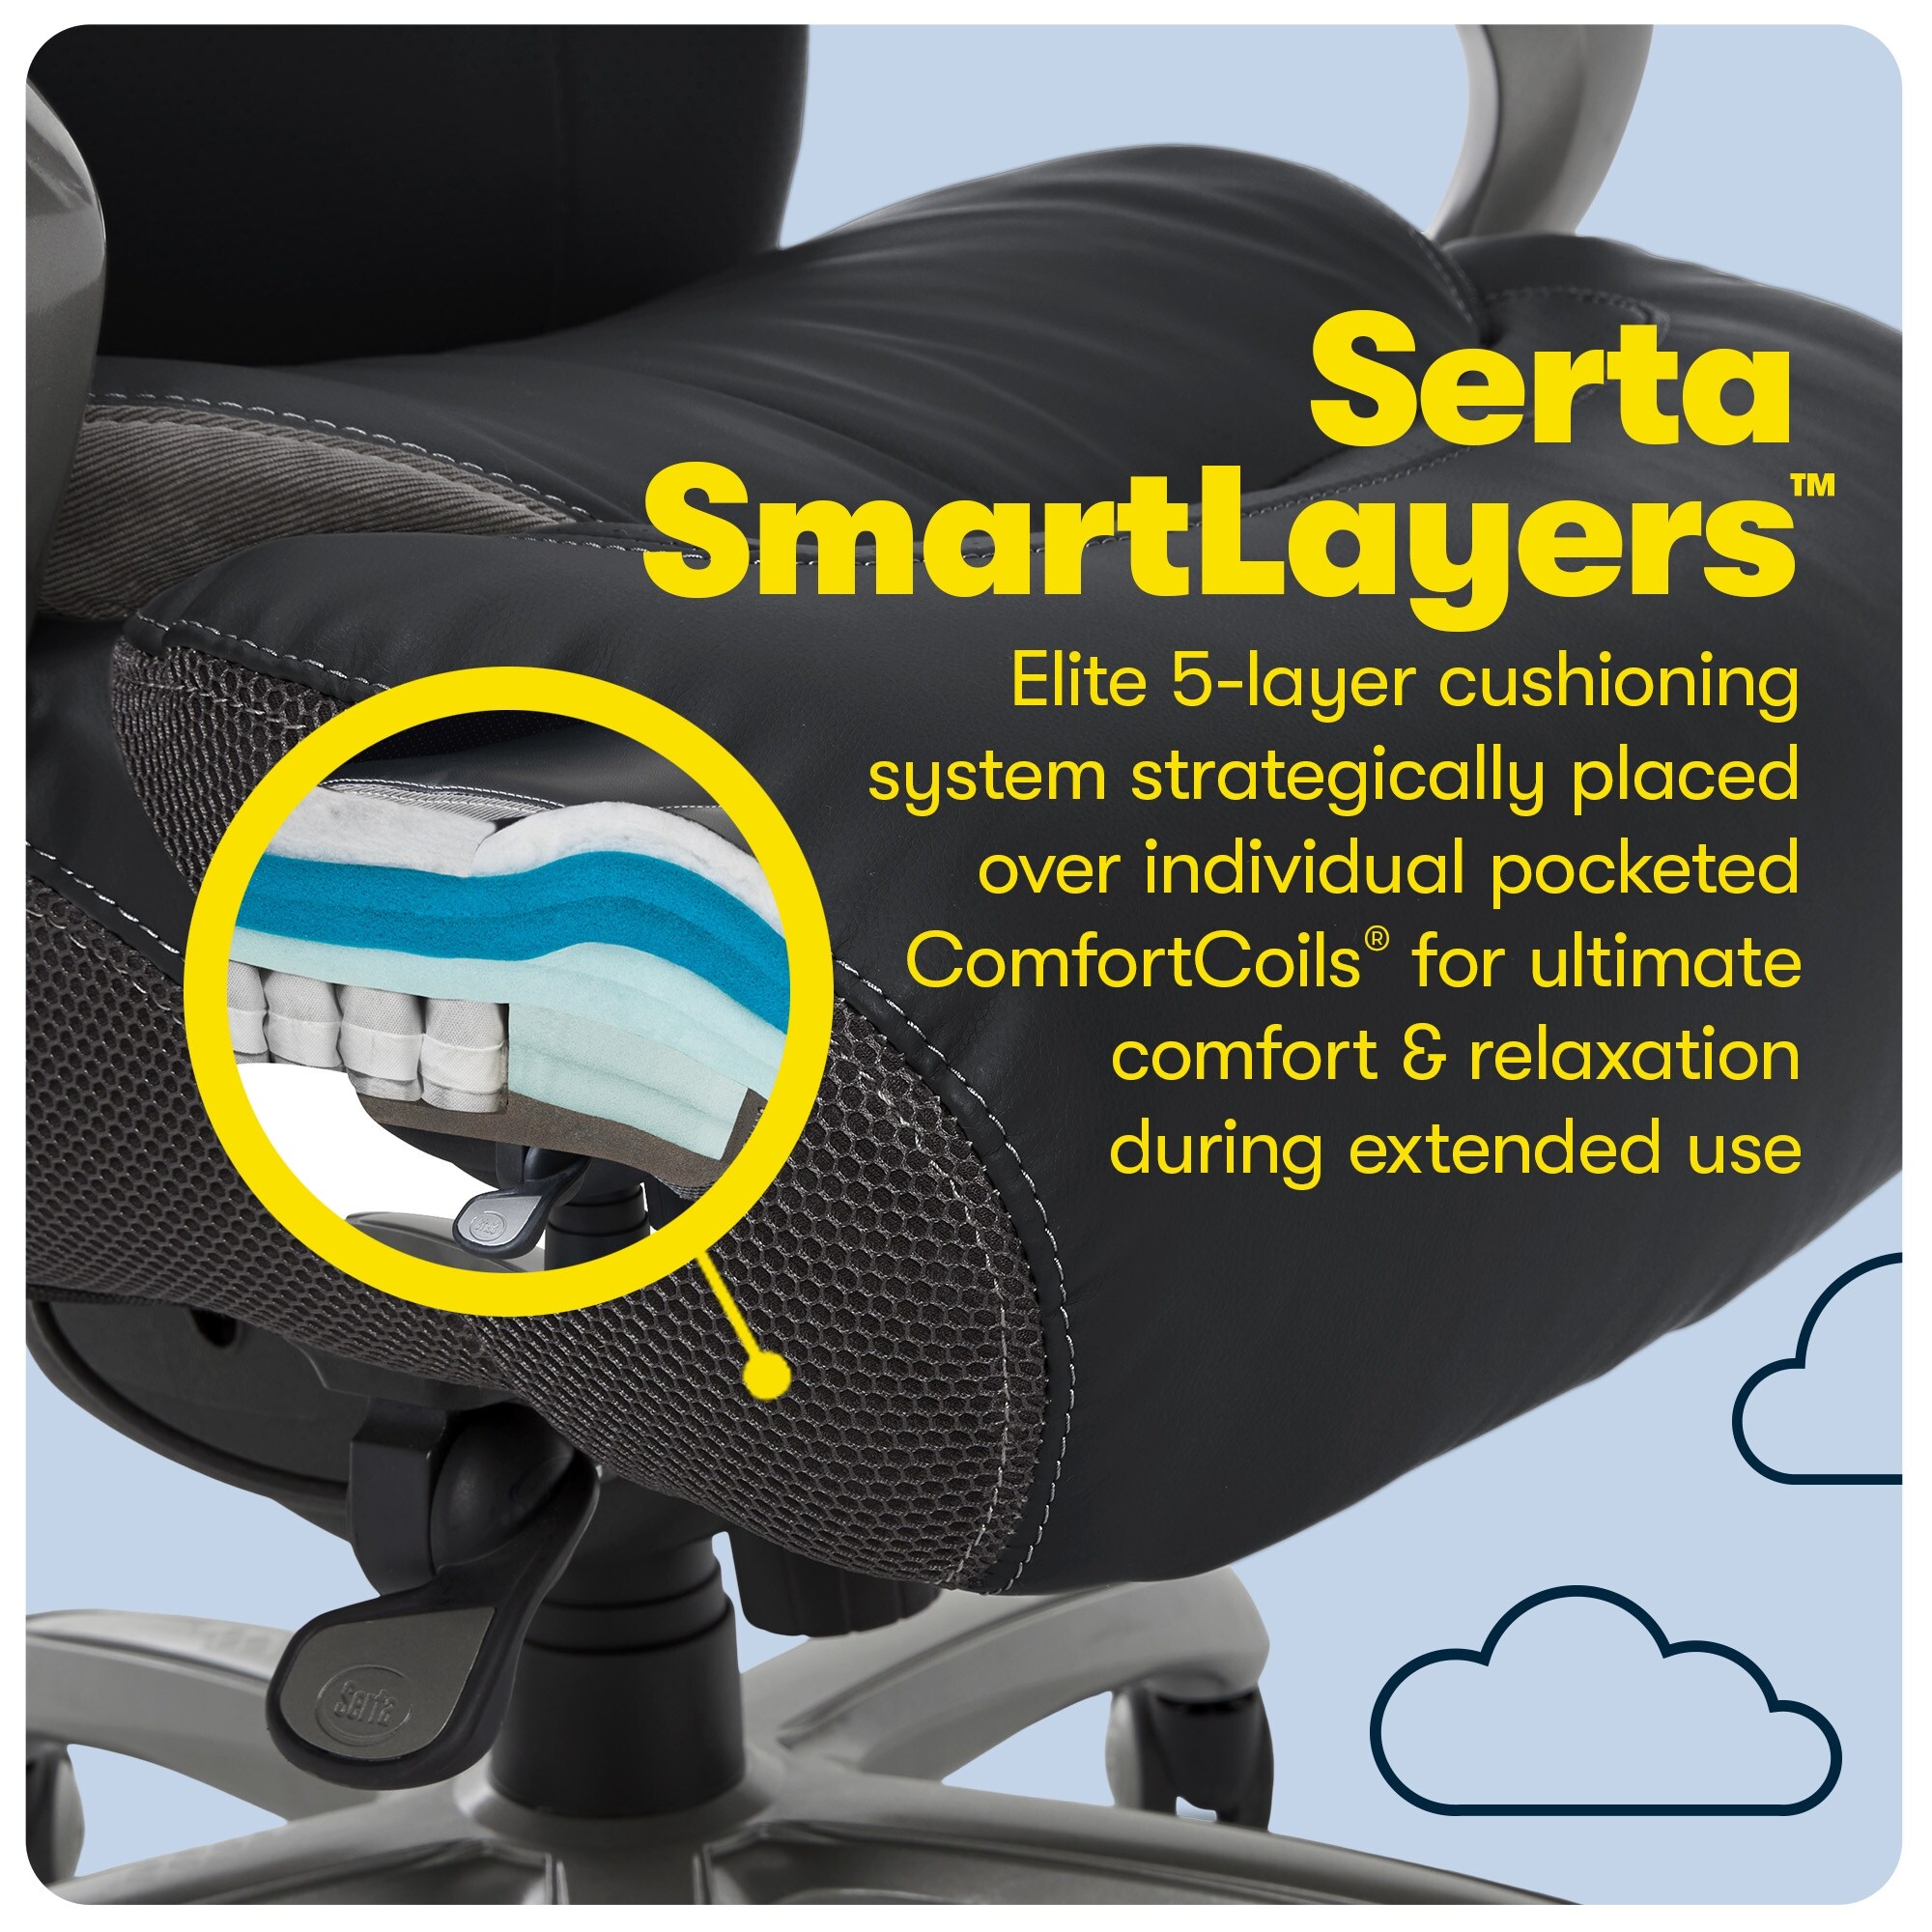 Serta Bryce Executive Office Chair with AIR Lumbar Technology and Layered  Body Pillows - On Sale - Bed Bath & Beyond - 9116644